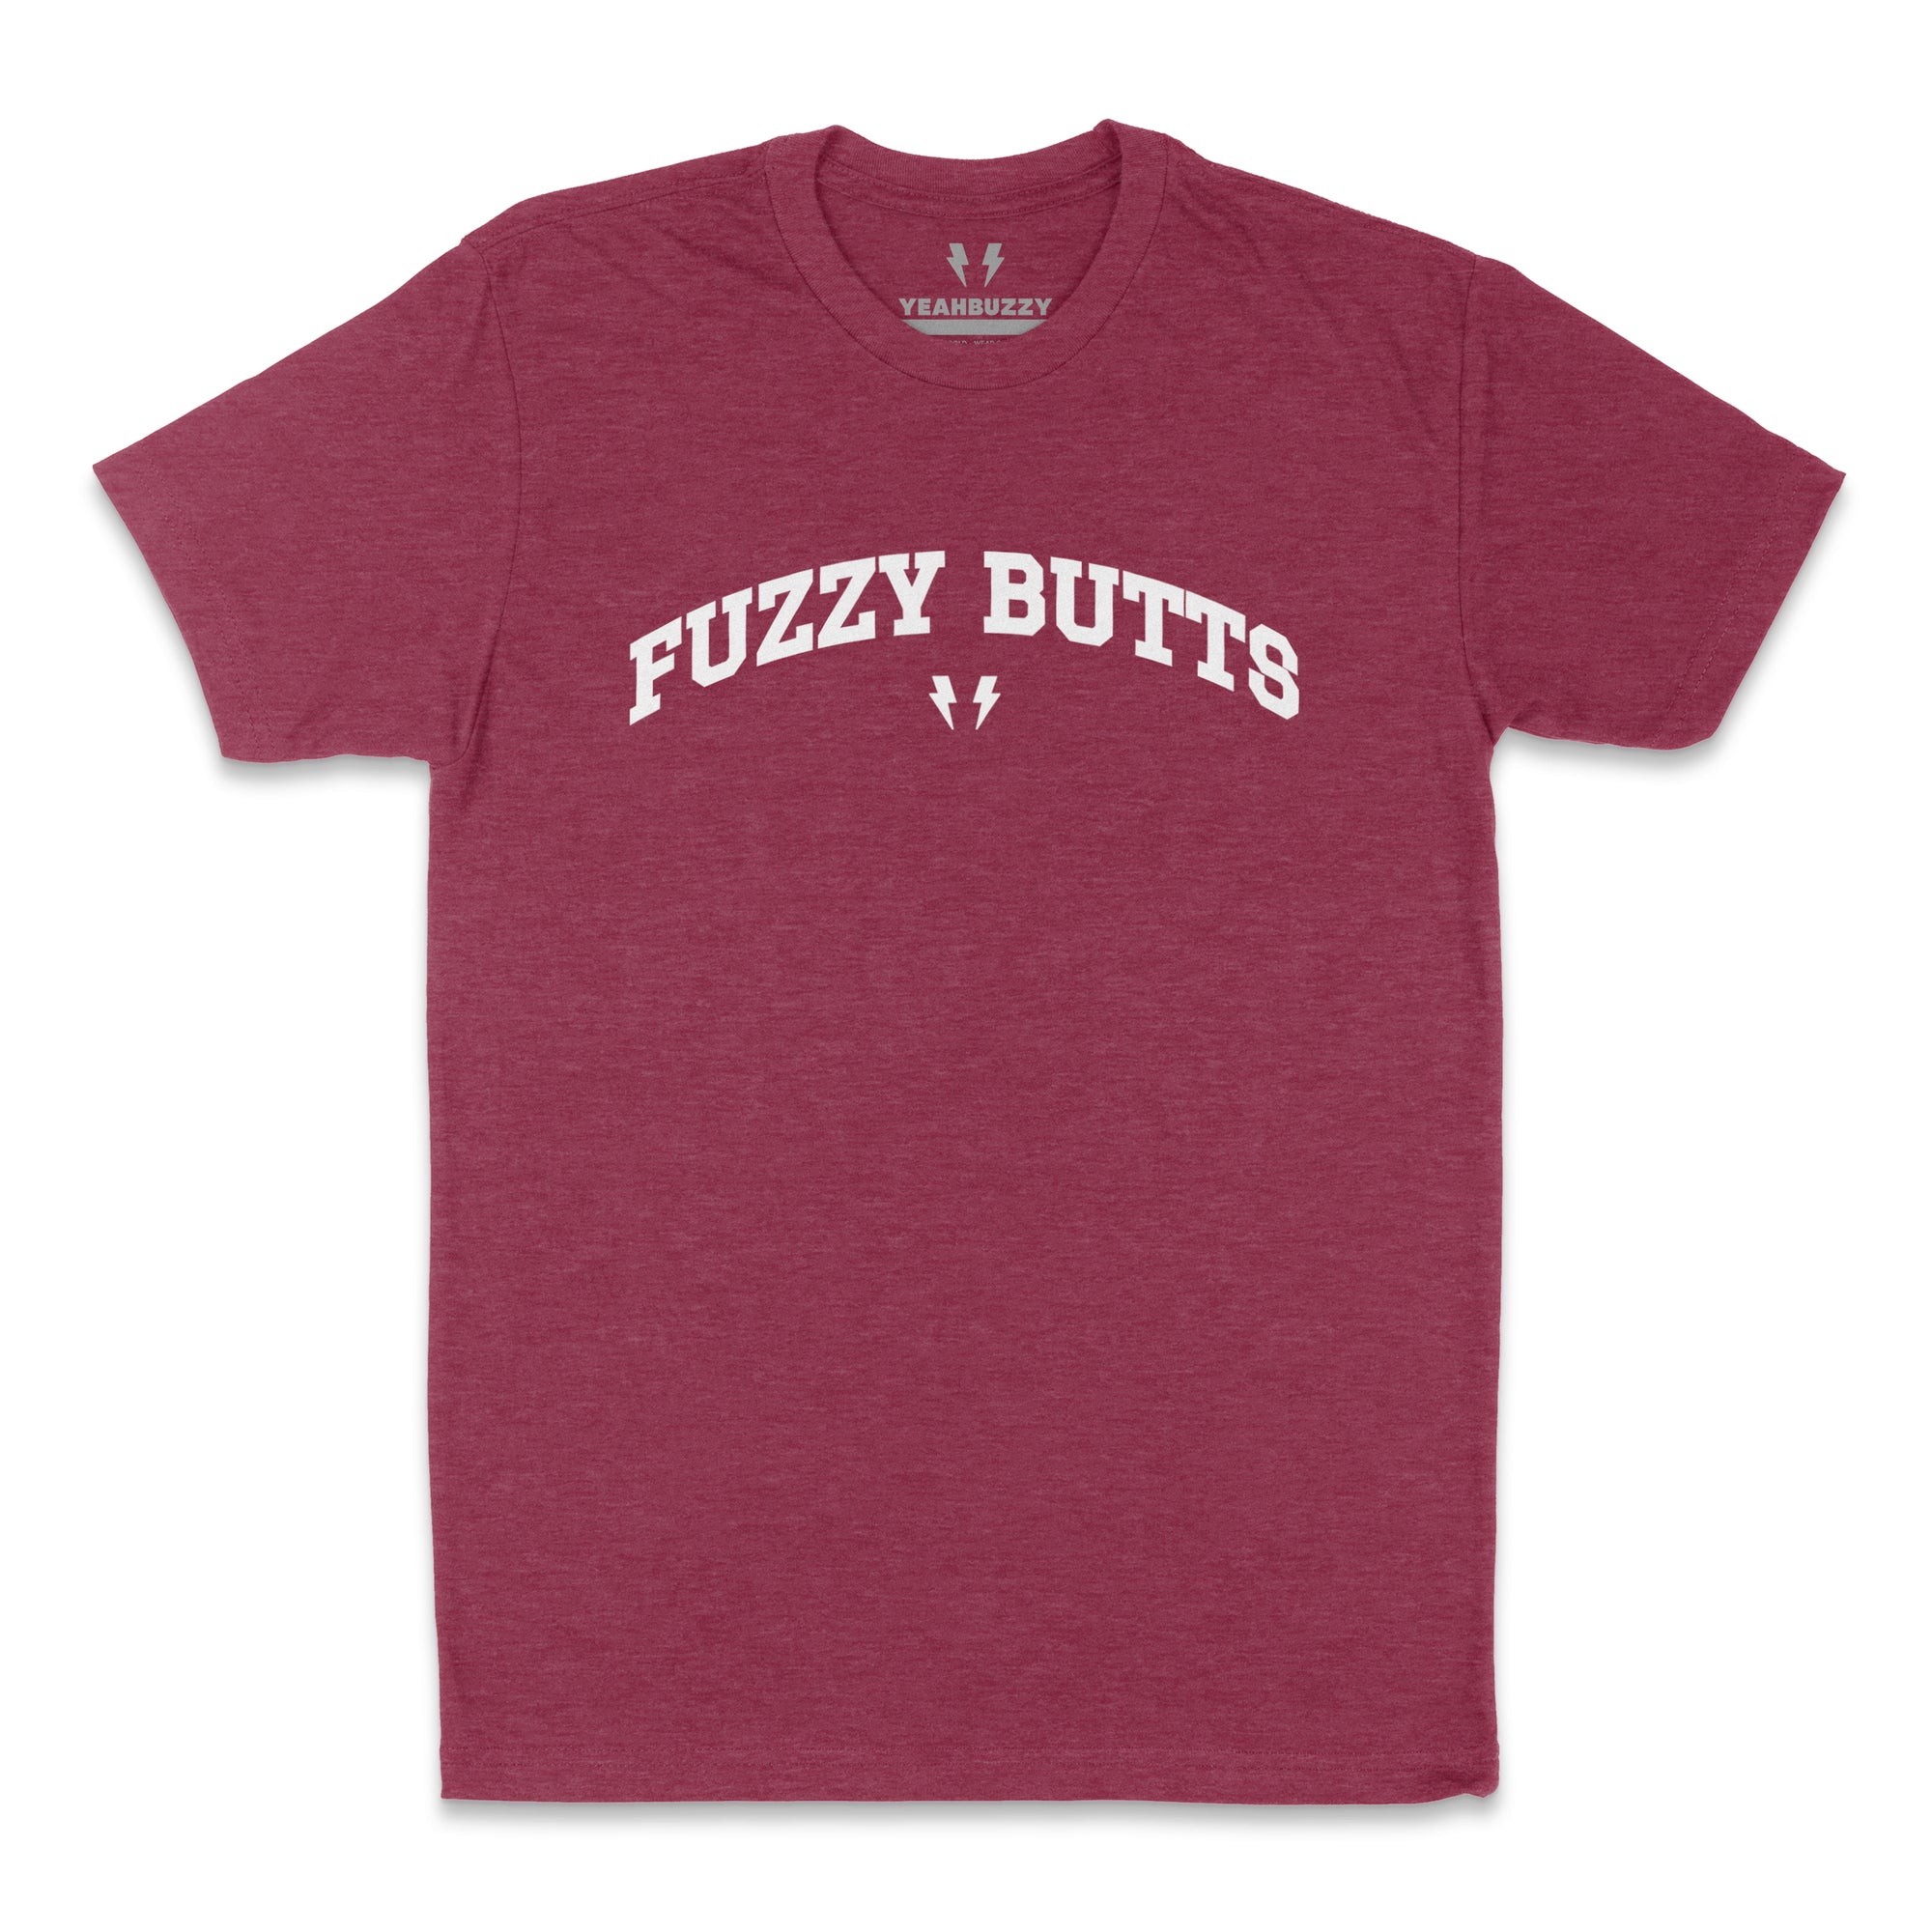 Fuzzy Butts Tee